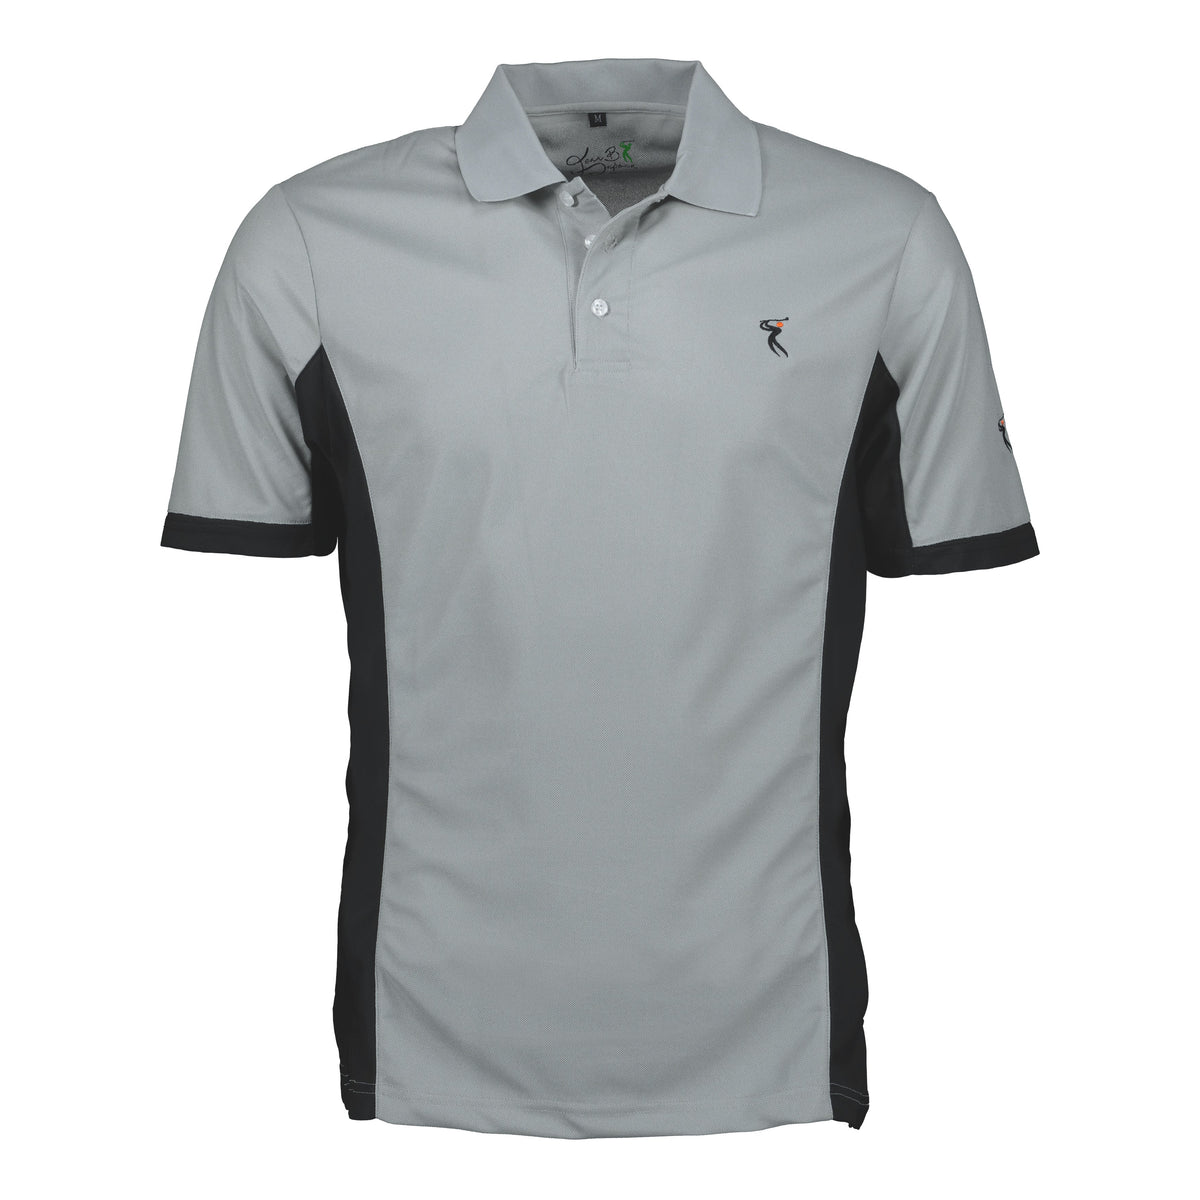 fitted golf shirts